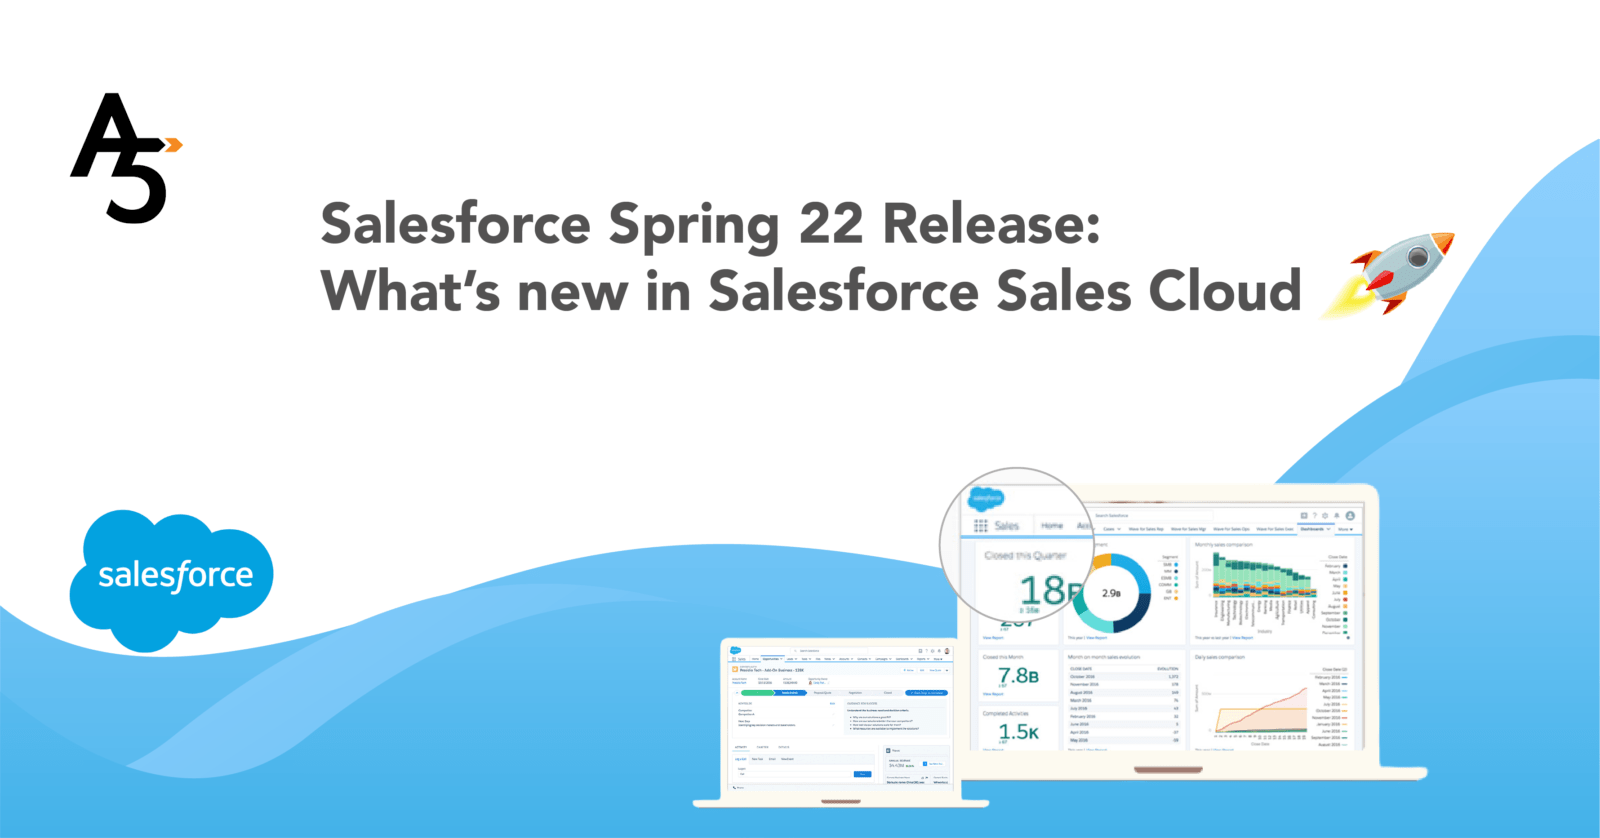 Salesforce Spring 22 Release: What’s new in Salesforce Sales Cloud